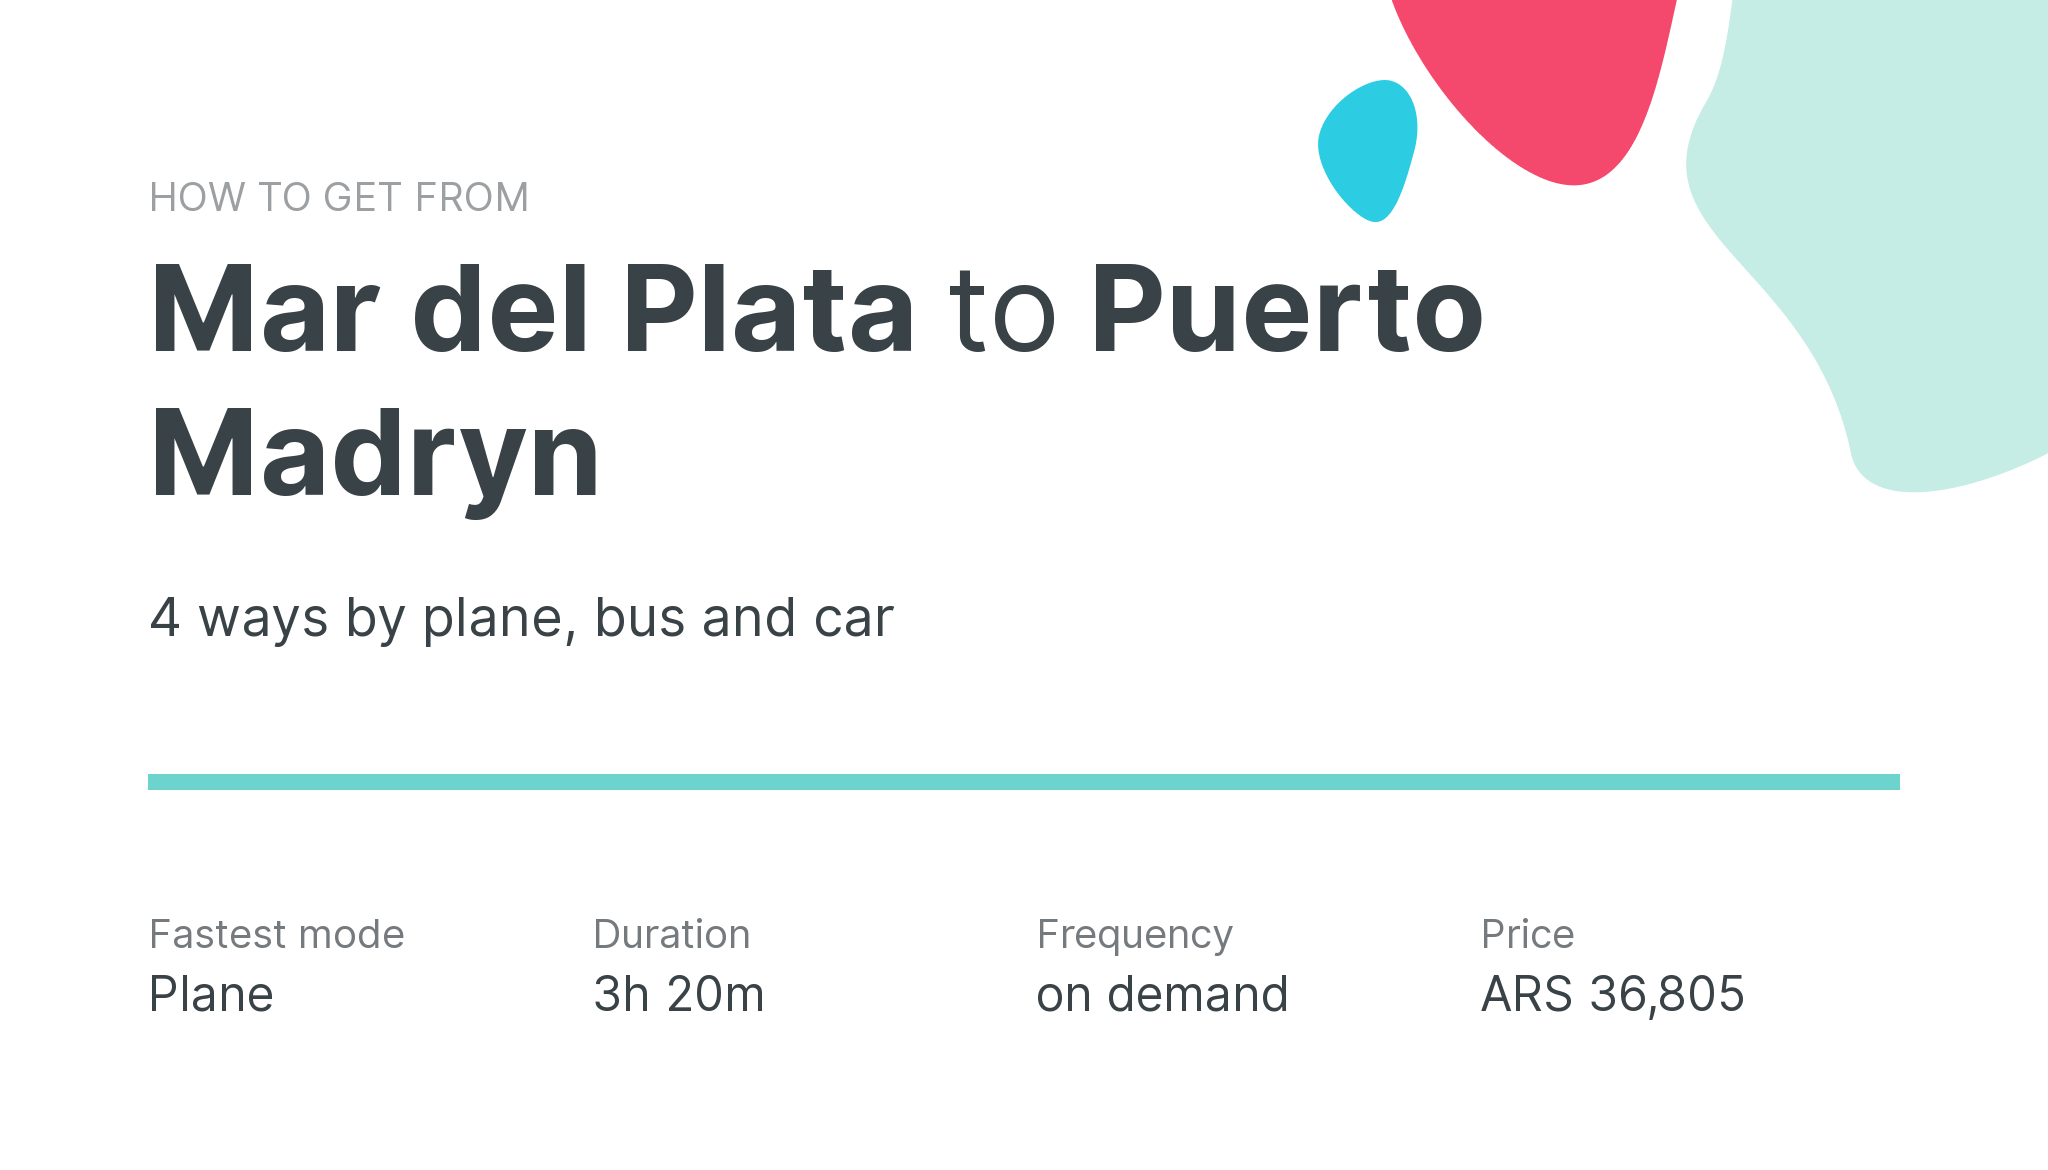 How do I get from Mar del Plata to Puerto Madryn